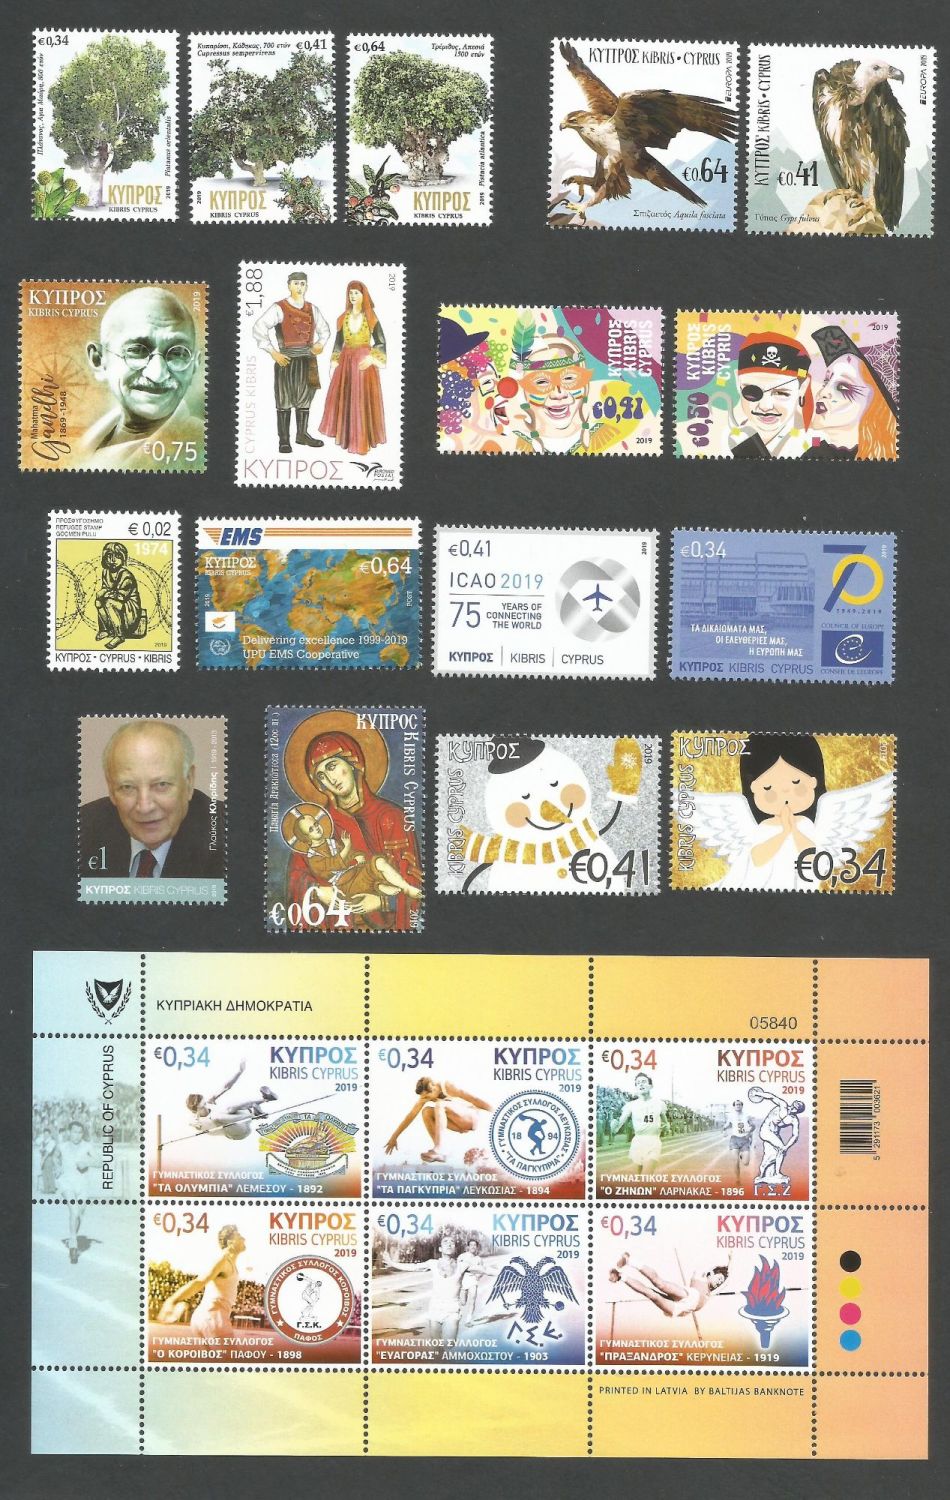 Cyprus Stamps 2019 Complete Year Set - (Booklets not included) MINT